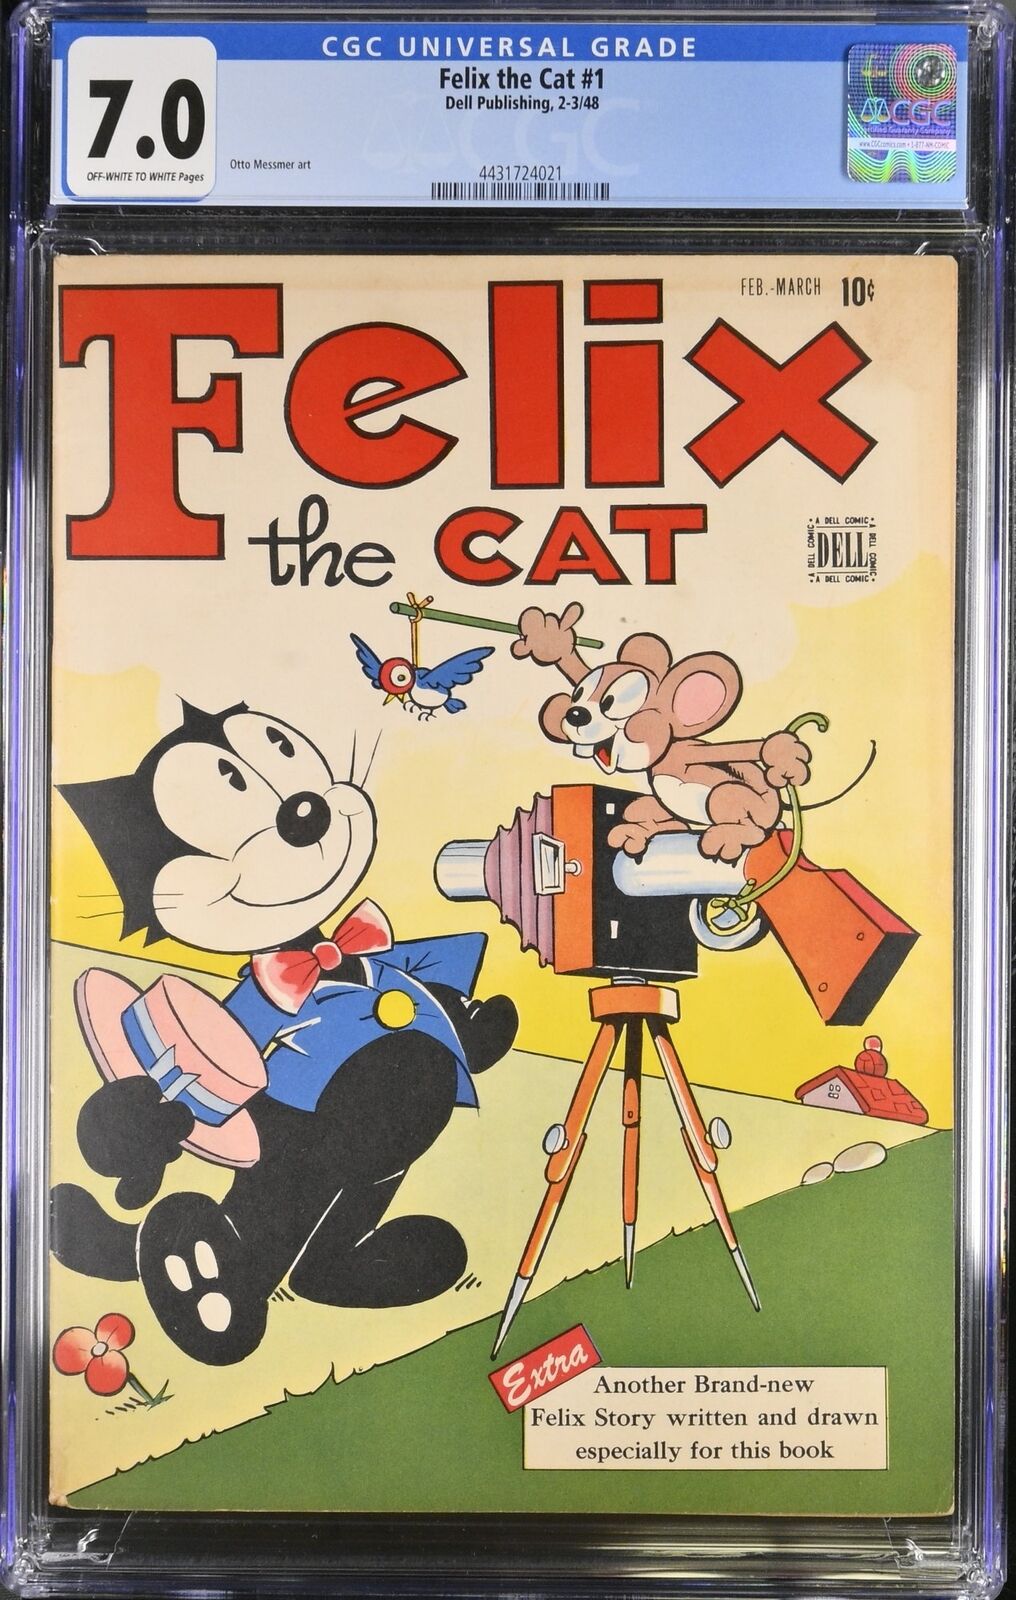 Felix the Cat (1948) #1 CGC FN/VF 7.0 Off White to White Toby 1948